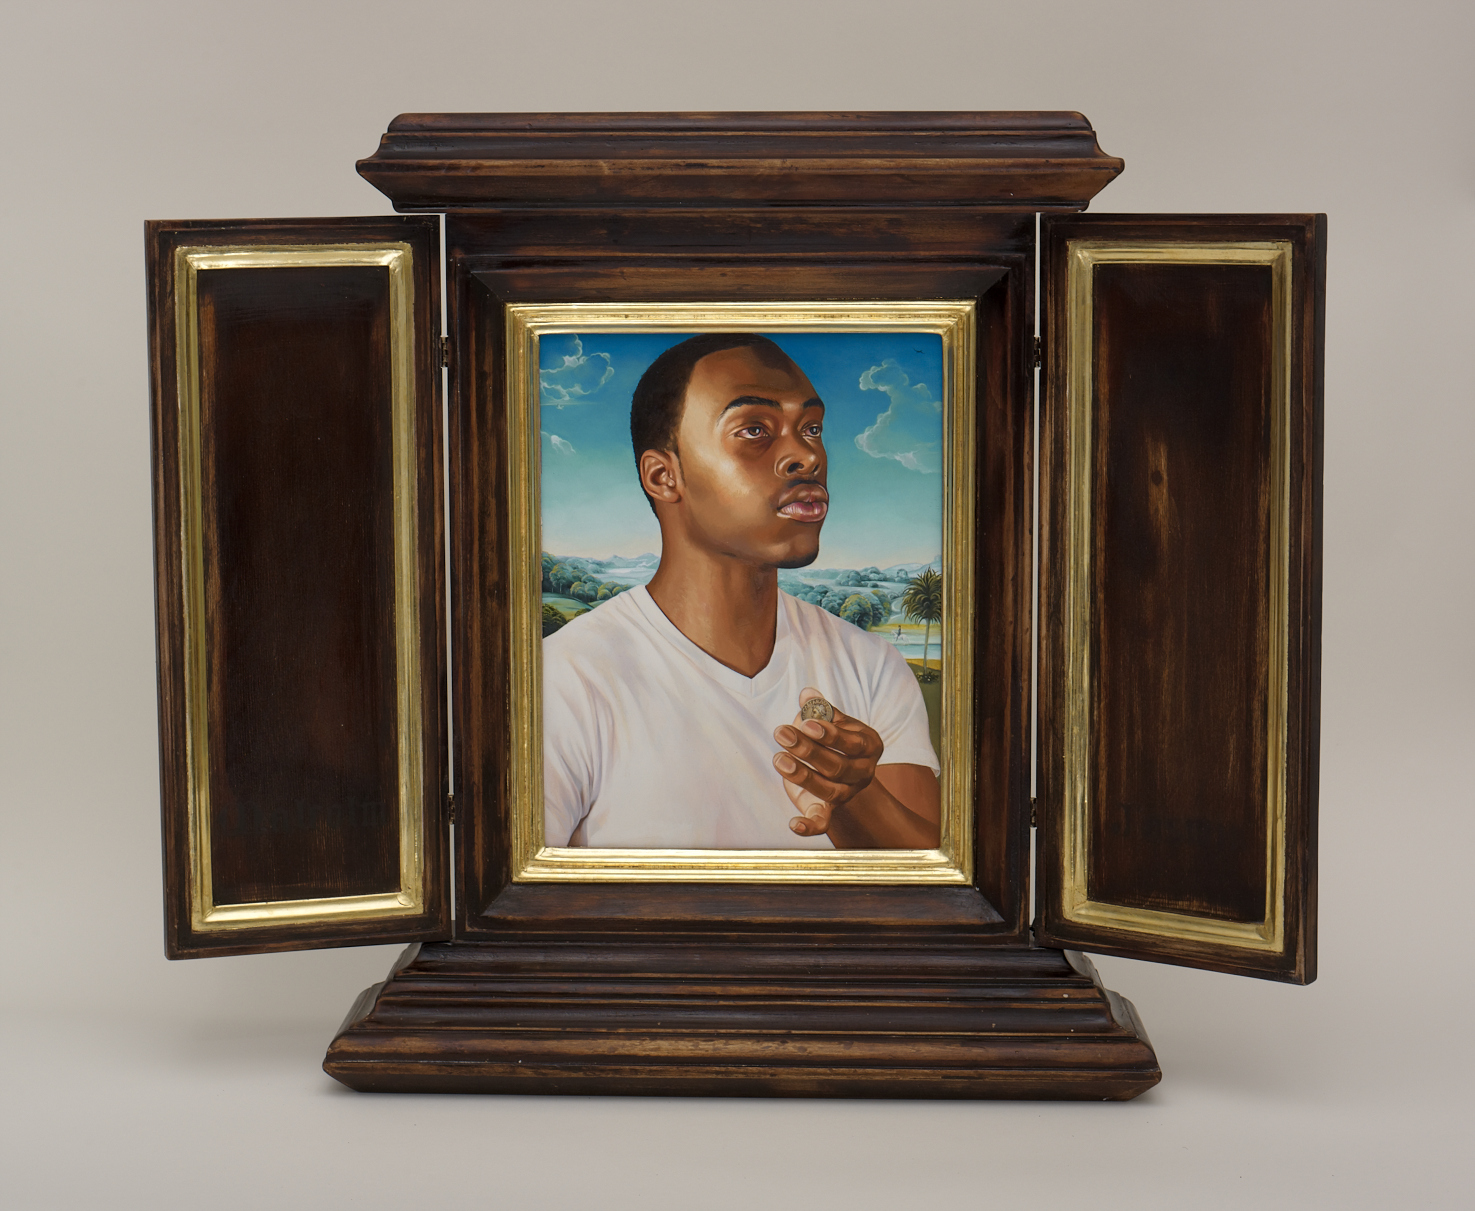 kehindewiley_a new republic_After Memling's Portrait of a Man with a Coin of the Emperor Nero